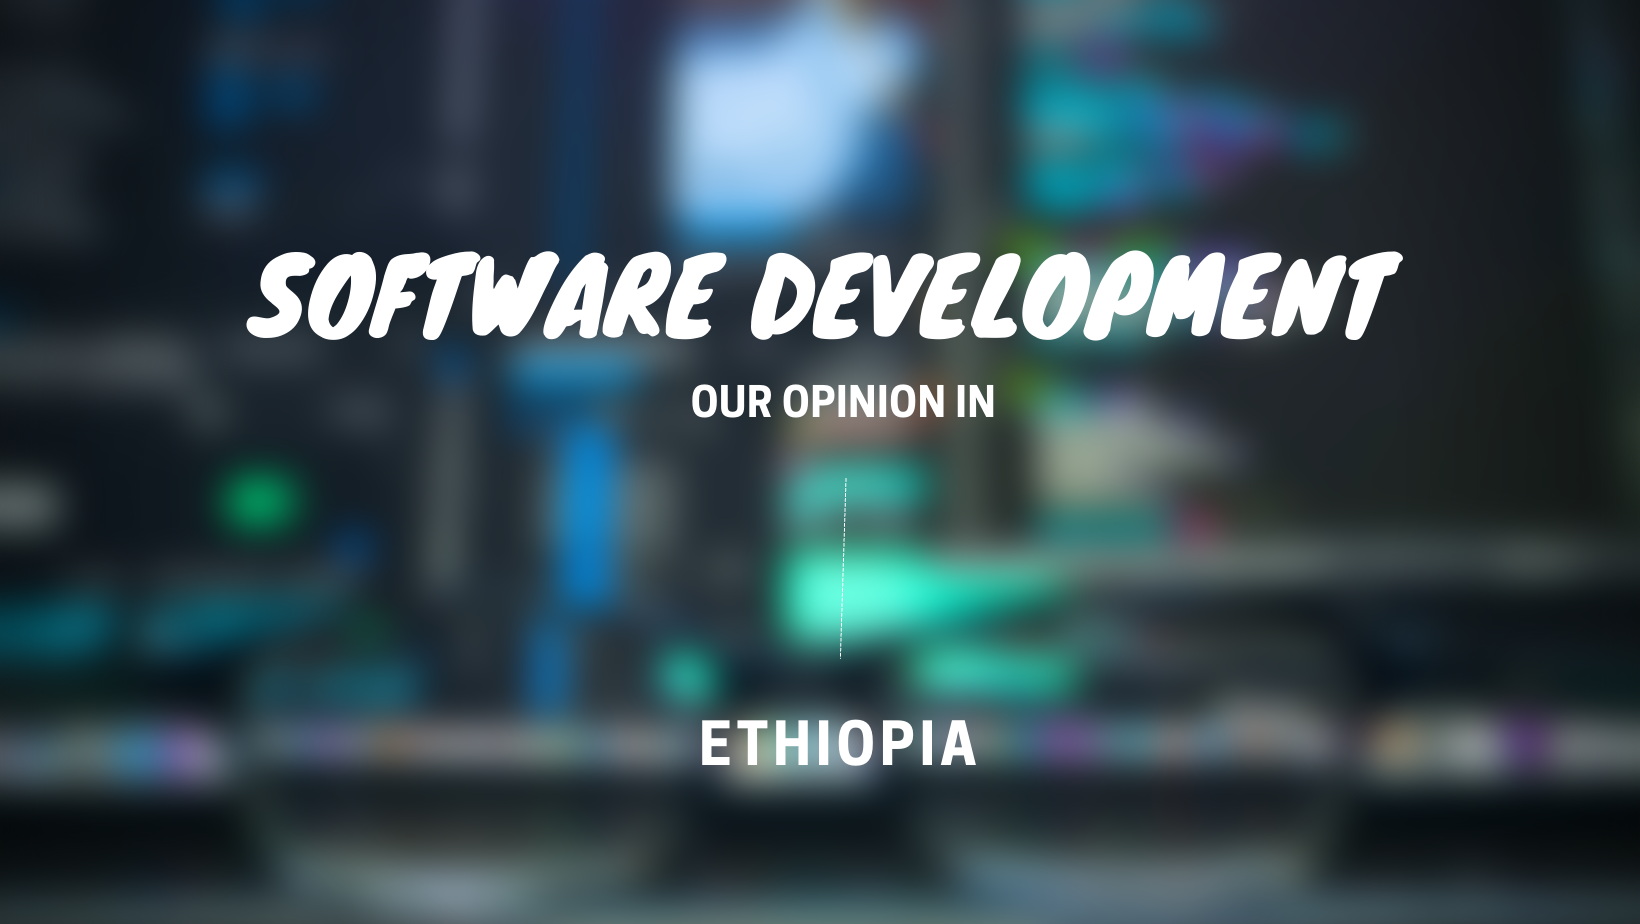 Cover Image for Our thoughts on software development in Ethiopia